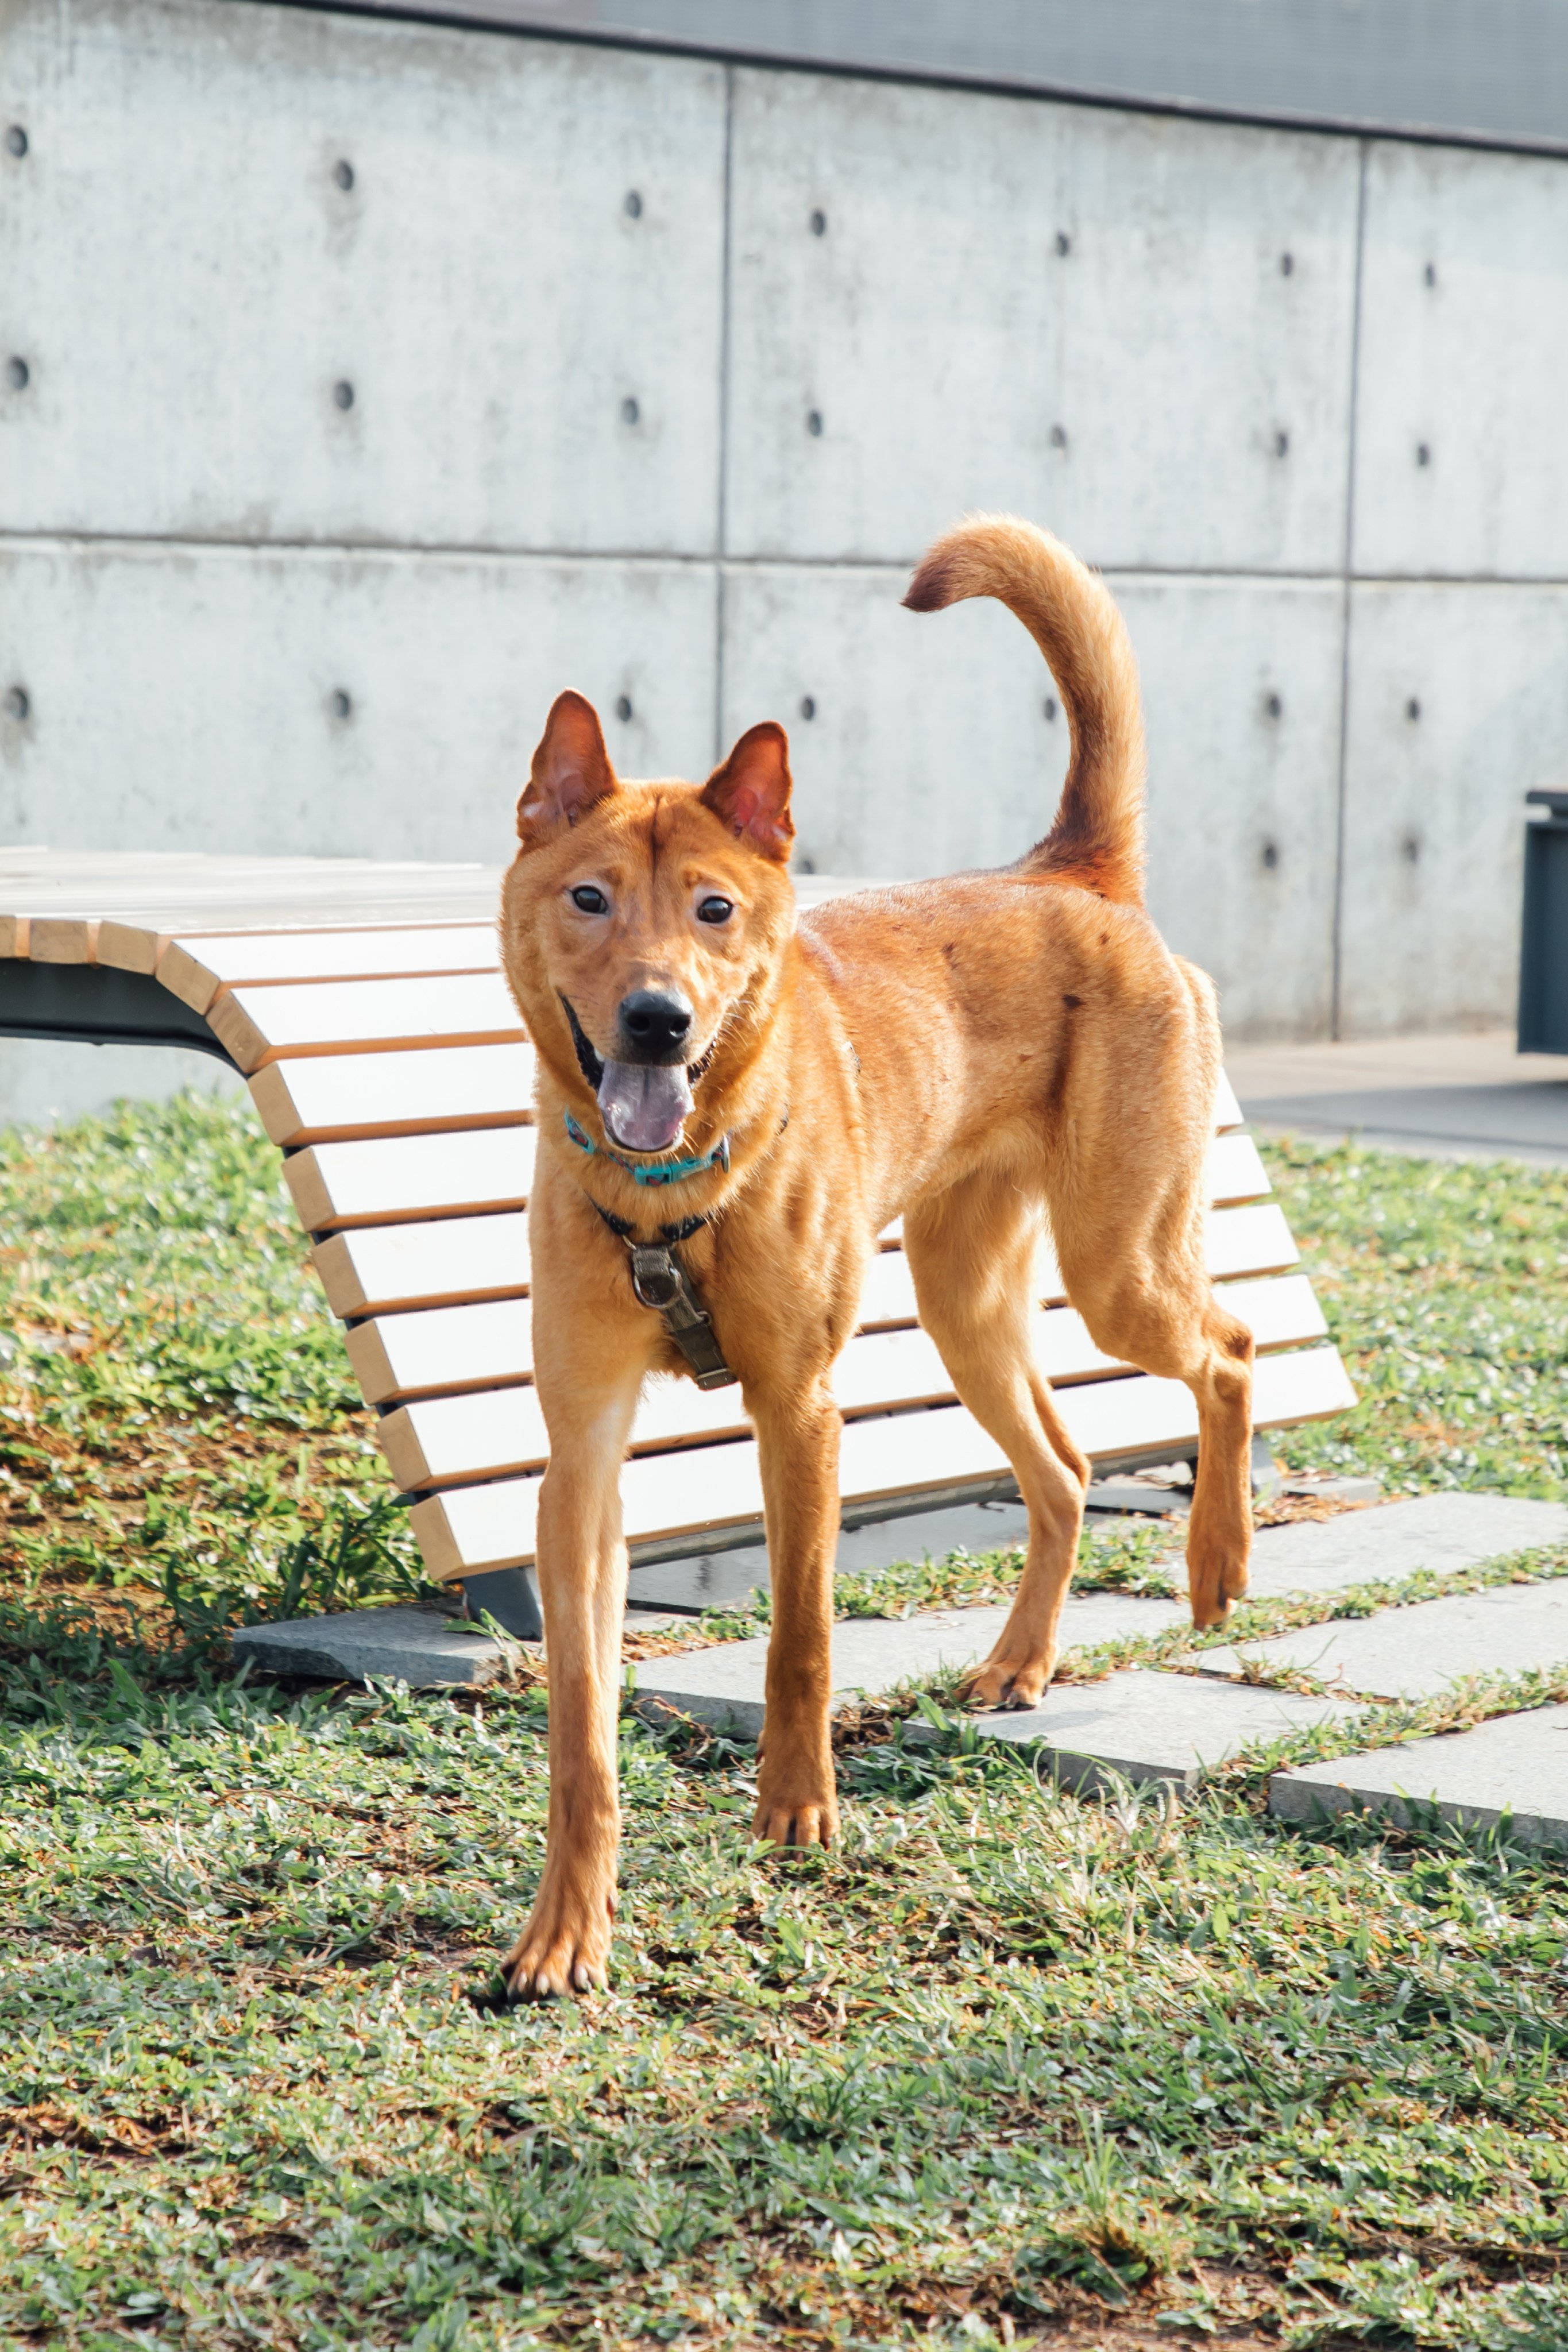 In Hong Kong, the Society for the Prevention of Cruelty to Animals has launched a dating app that allows users to swipe profiles of rescue animals – just as people looking for mates do on Tinder. Photo: SPCA